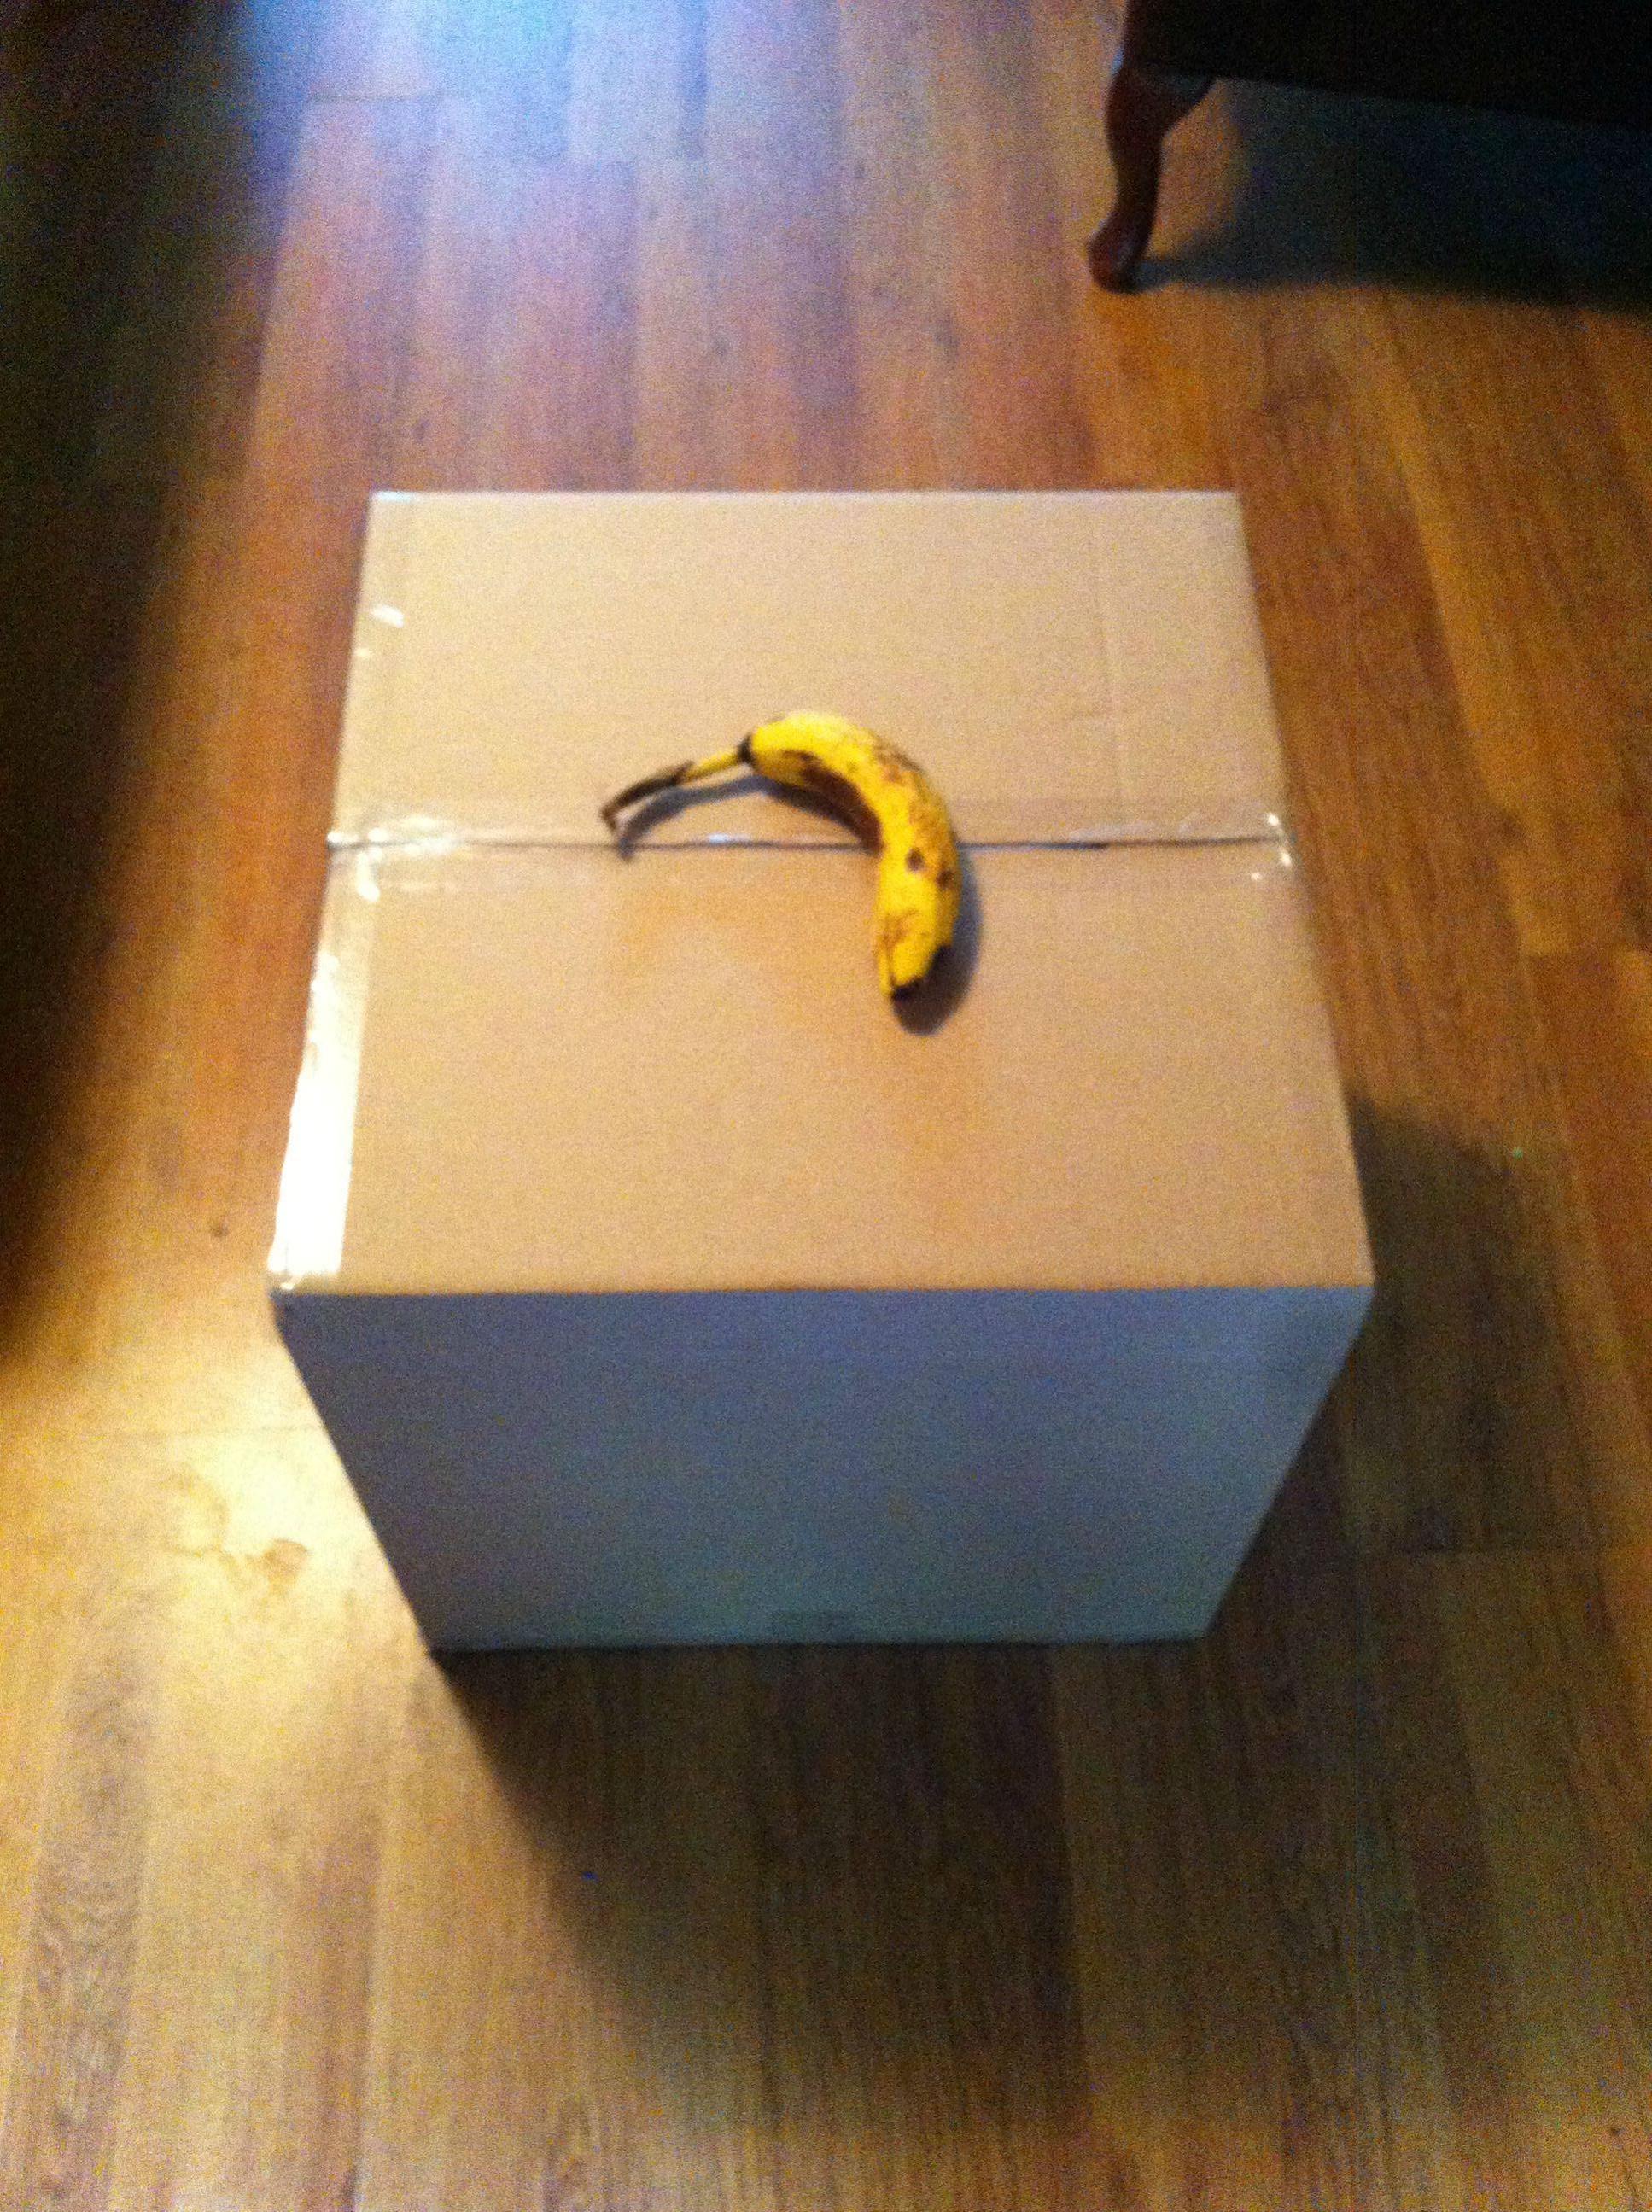 Step 10: Tape it up and you're ready to go! (Banana for scale)